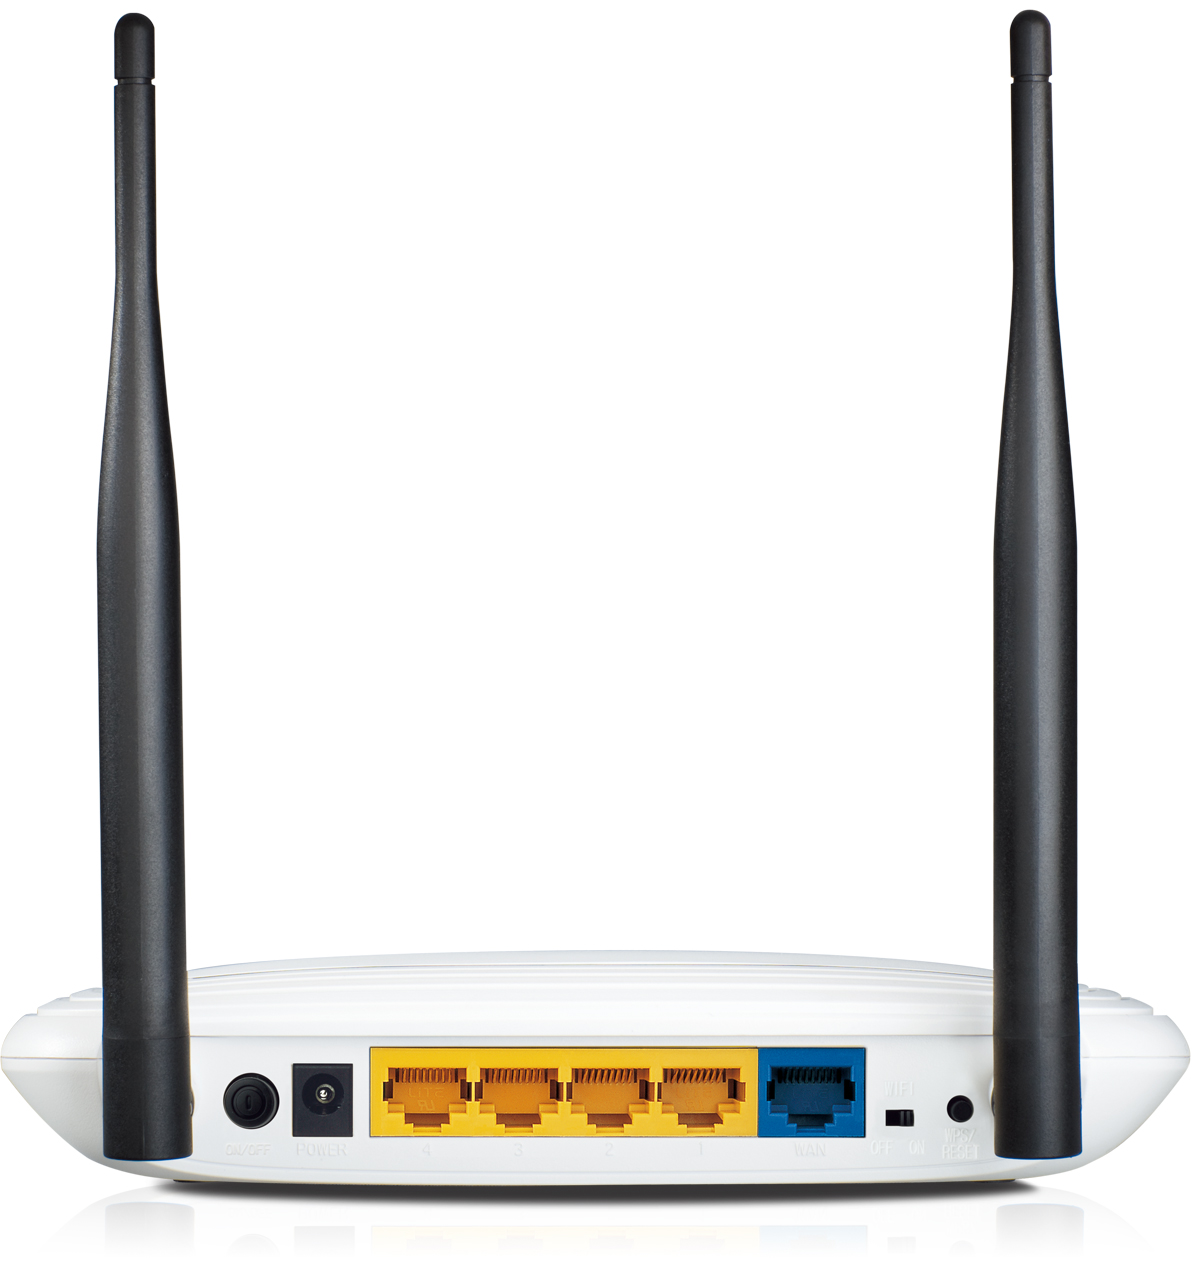 Hard reset TP-LINK TL-WR12ND - How to Hard Reset Your Router